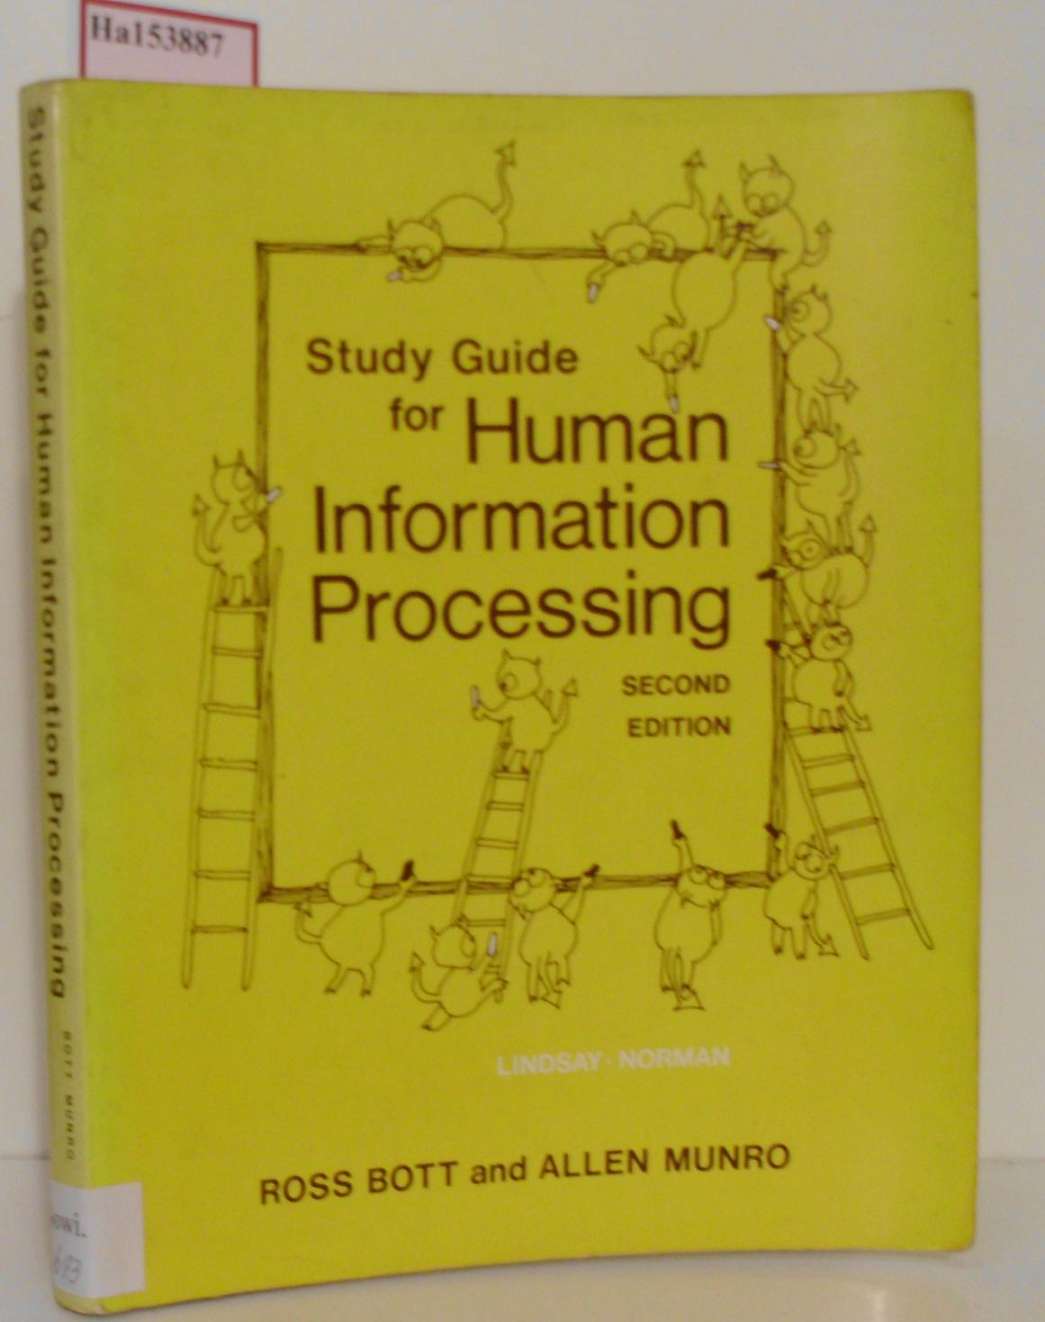 Study Guide for Human Information Processing. Lindsay. Norman. - Bott, Ross and Allen Munro